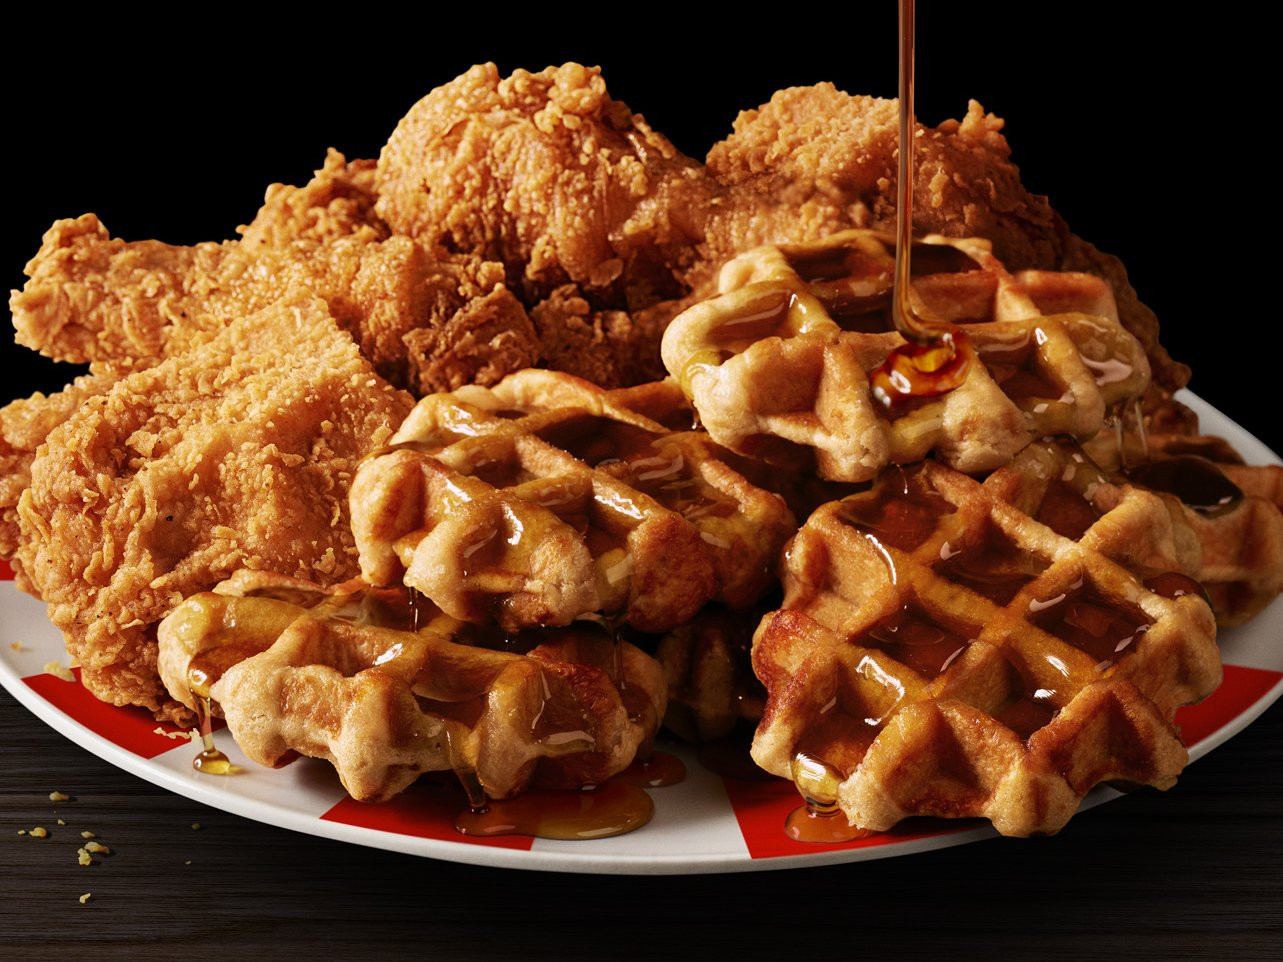 Kfc Chicken And Waffles Review
 KFC chicken and waffles food review INSIDER